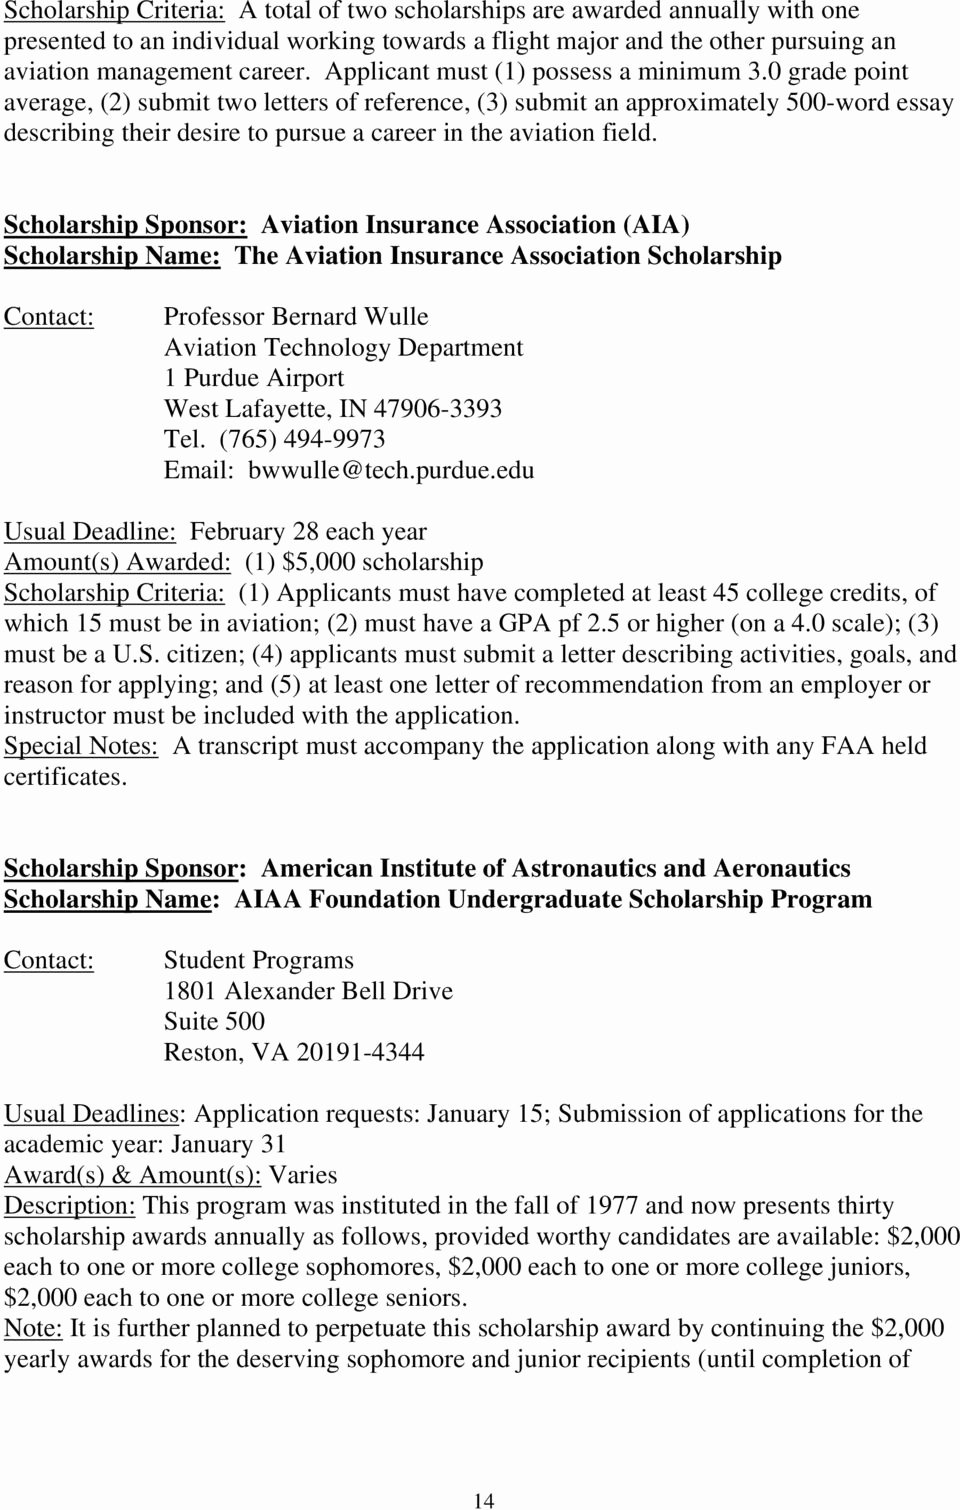 West Point Letter Of Recommendation Beautiful Collegiate Aviation Scholarship Listing Pdf